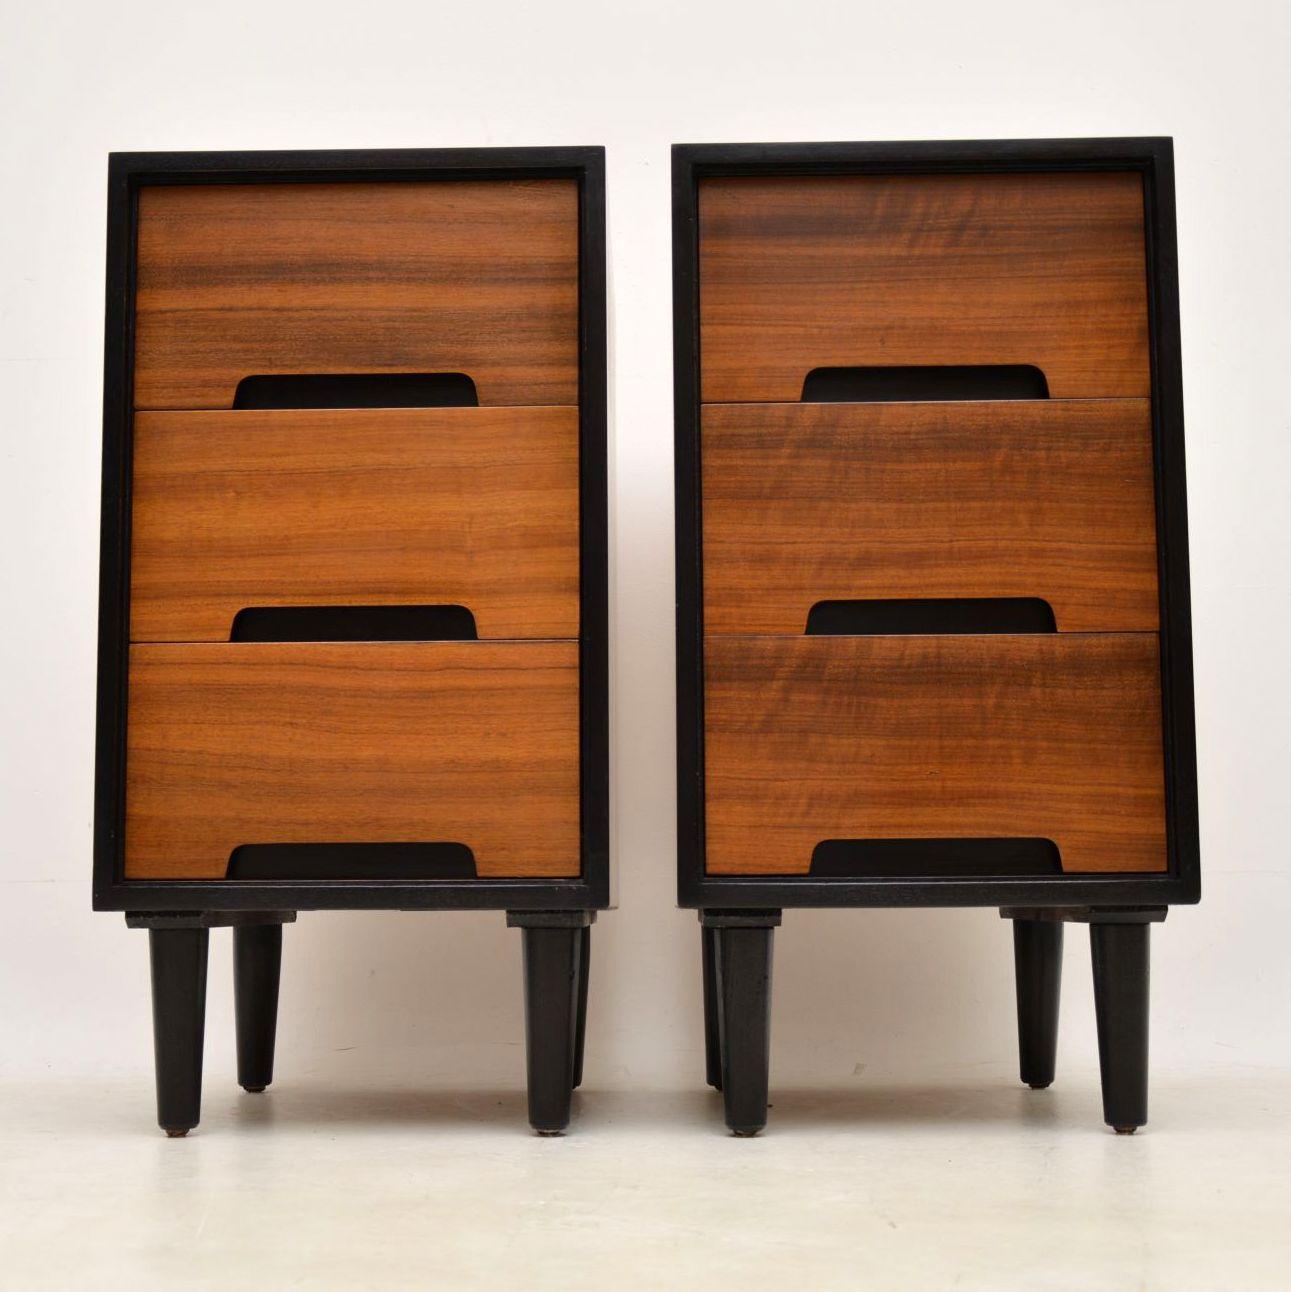 A stylish and very useful pair of vintage bedside chests, these were designed by John & Sylvia Reid for Stag furniture’s C range, they date from the 1950s. These are the harder to find versions in walnut, we have had them stripped and re-polished to